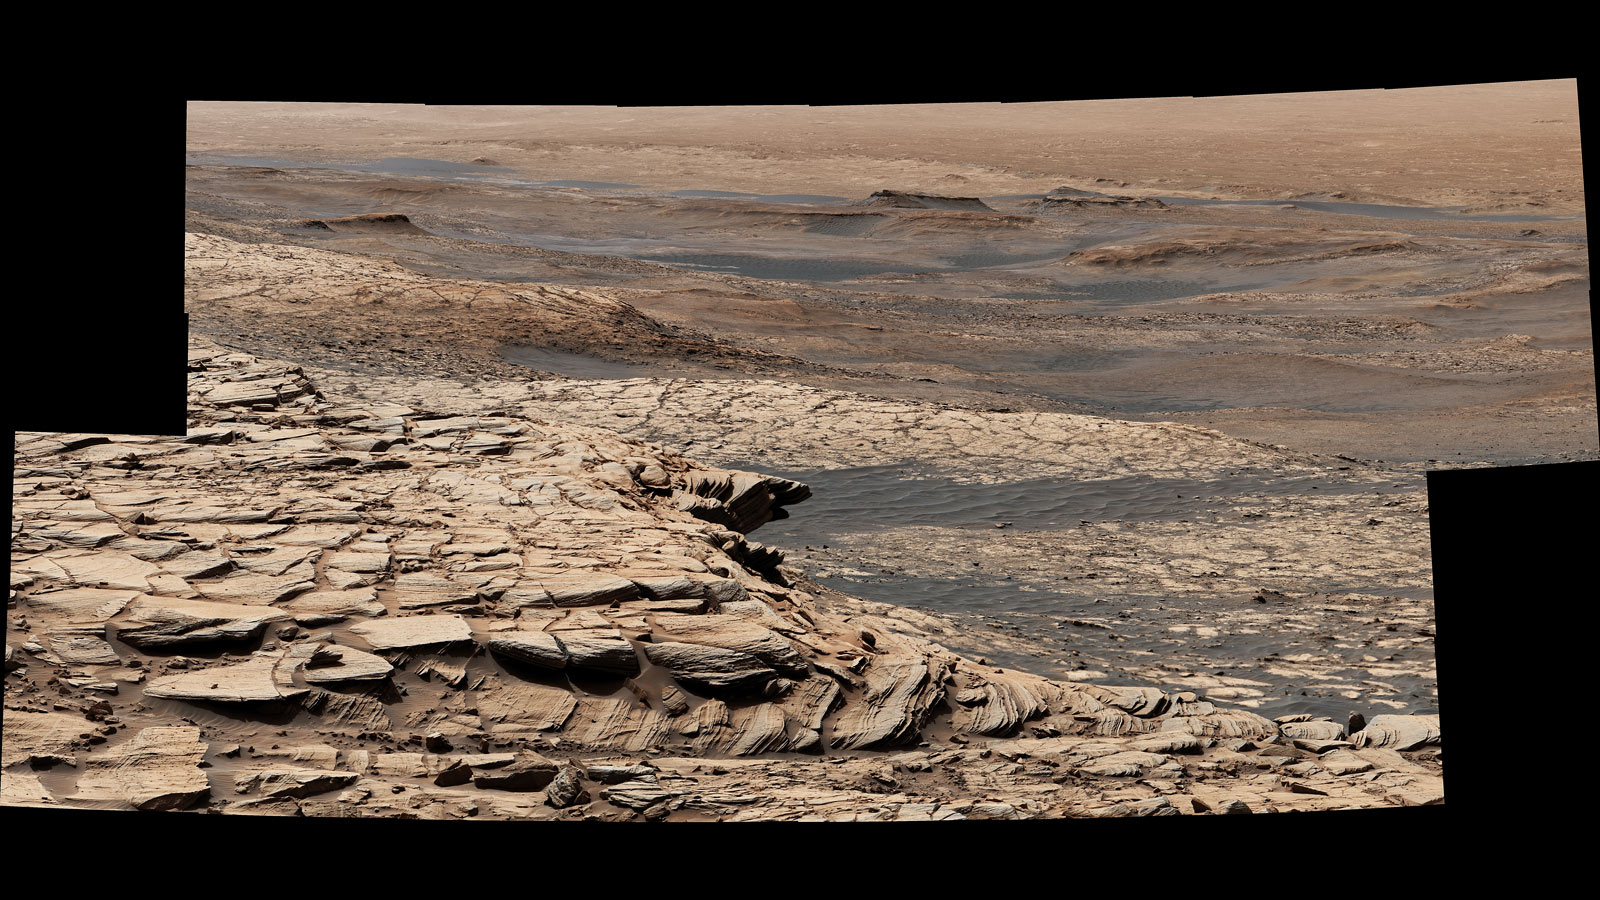 Curiosity Mars rover captured this view from "Greenheugh Pediment." In the foreground is the pediment's sandstone cap. At center is the "clay-bearing unit"; the floor of Gale Crater is in the distance.